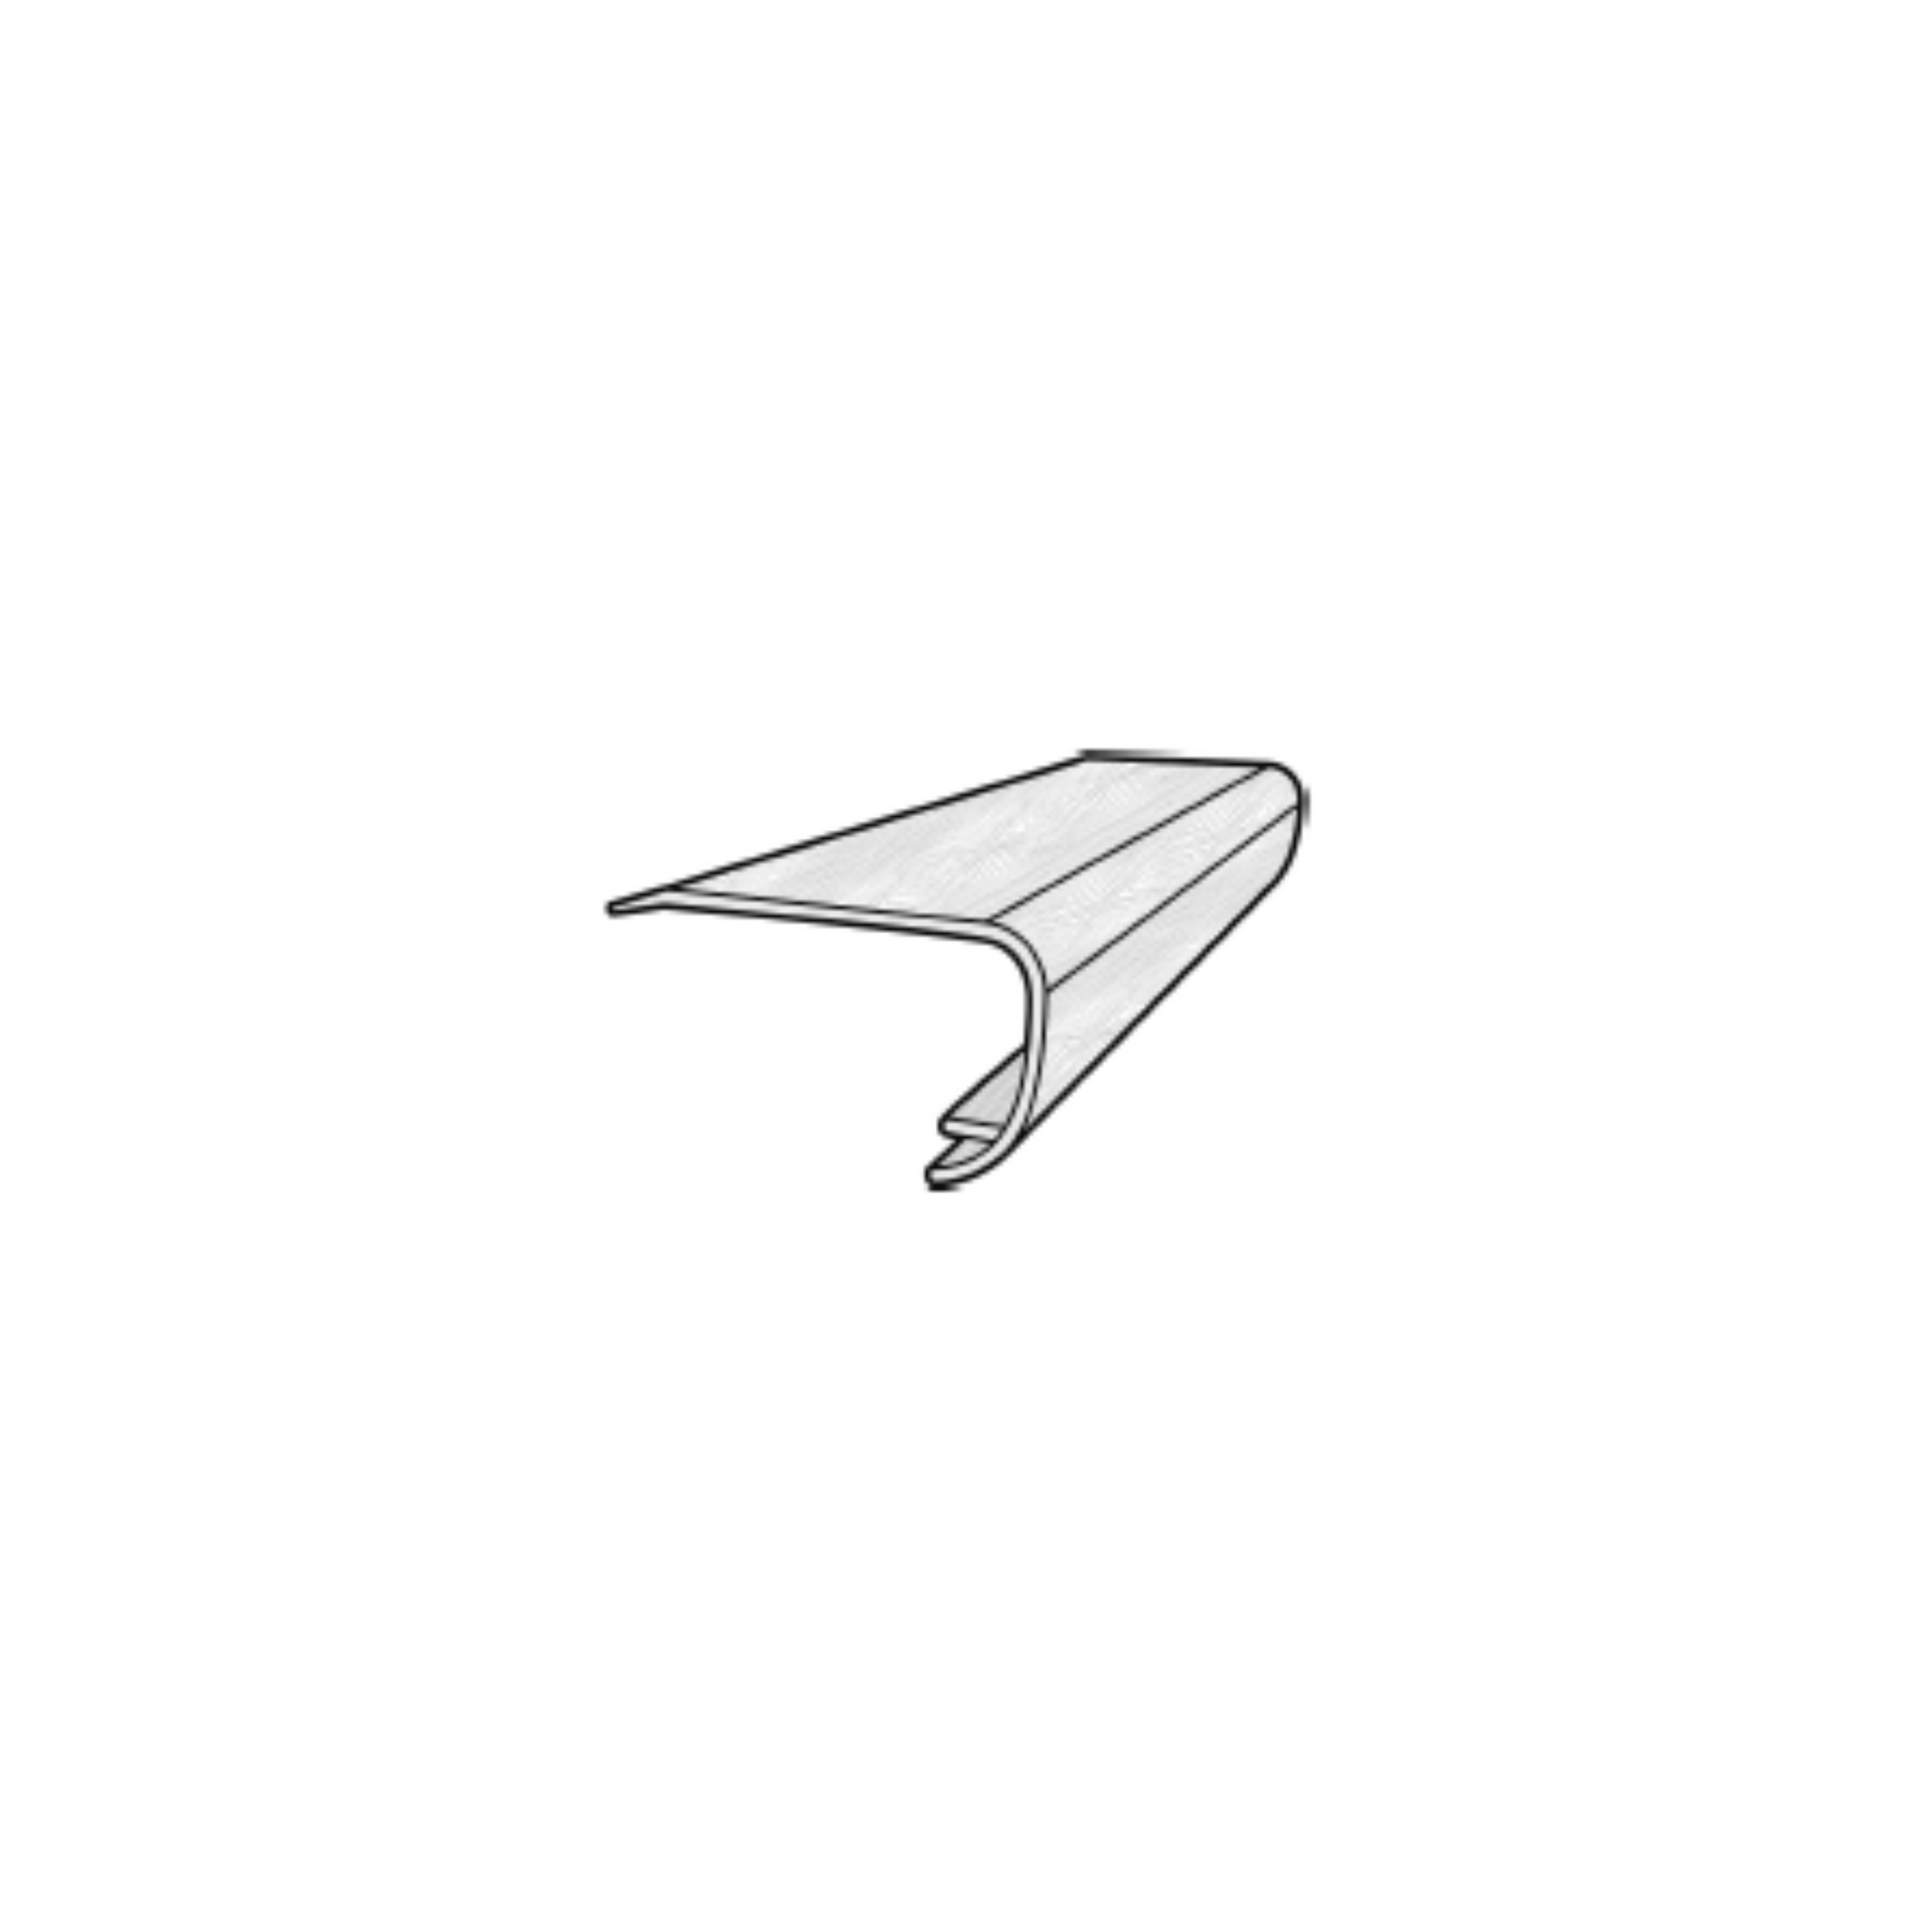 Accessory MSI - Cyrus - Ludlow - Overlap Stair Nose MSI